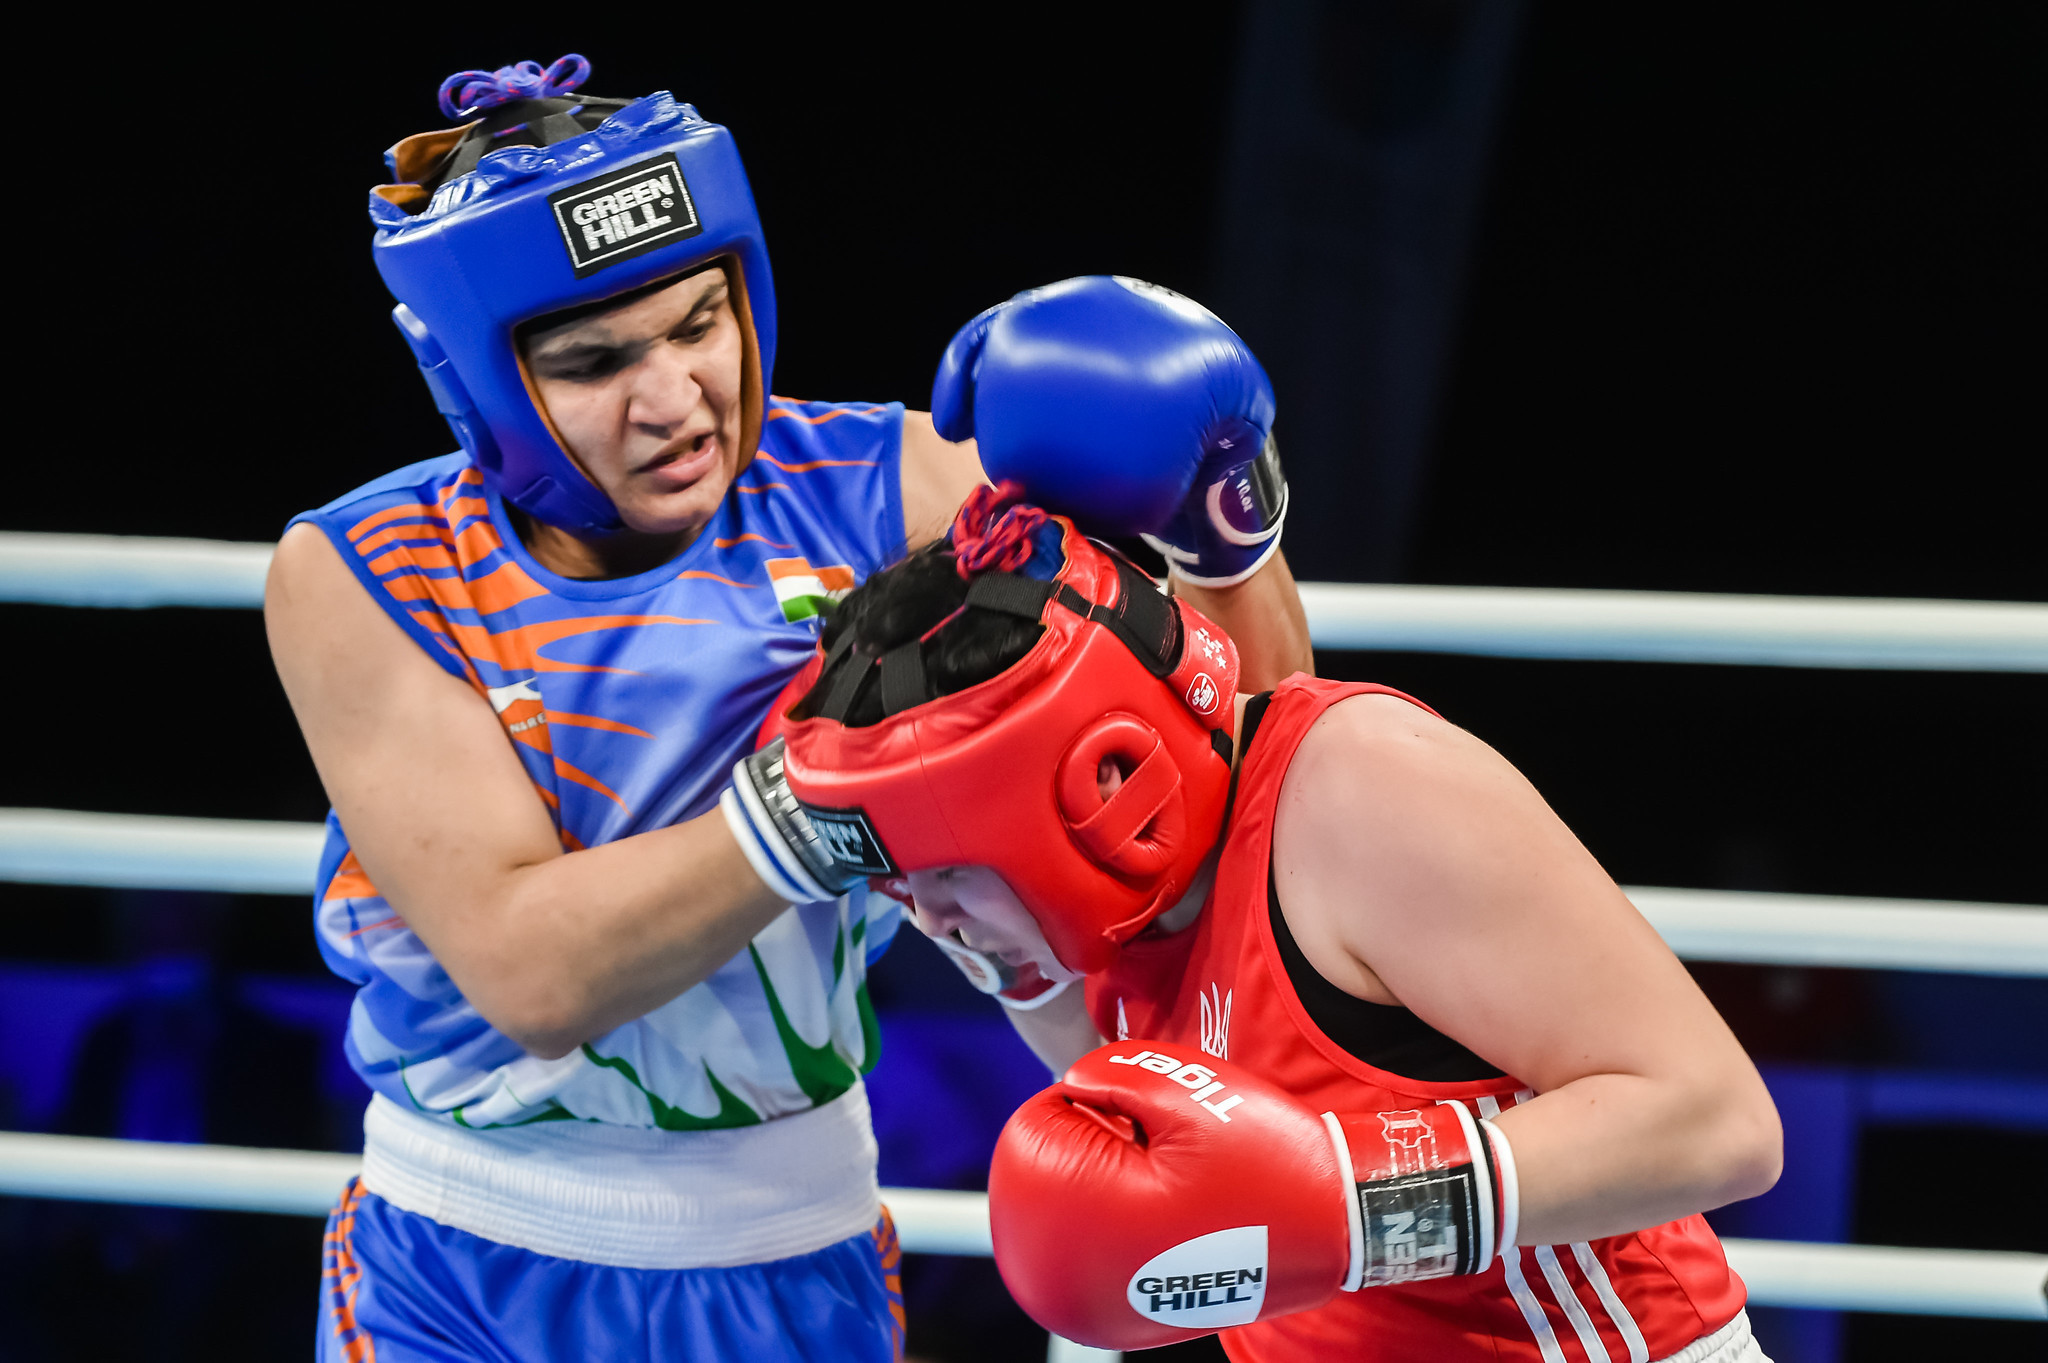 Indian boxers power into the medal zone at AIBA Youth World Championships